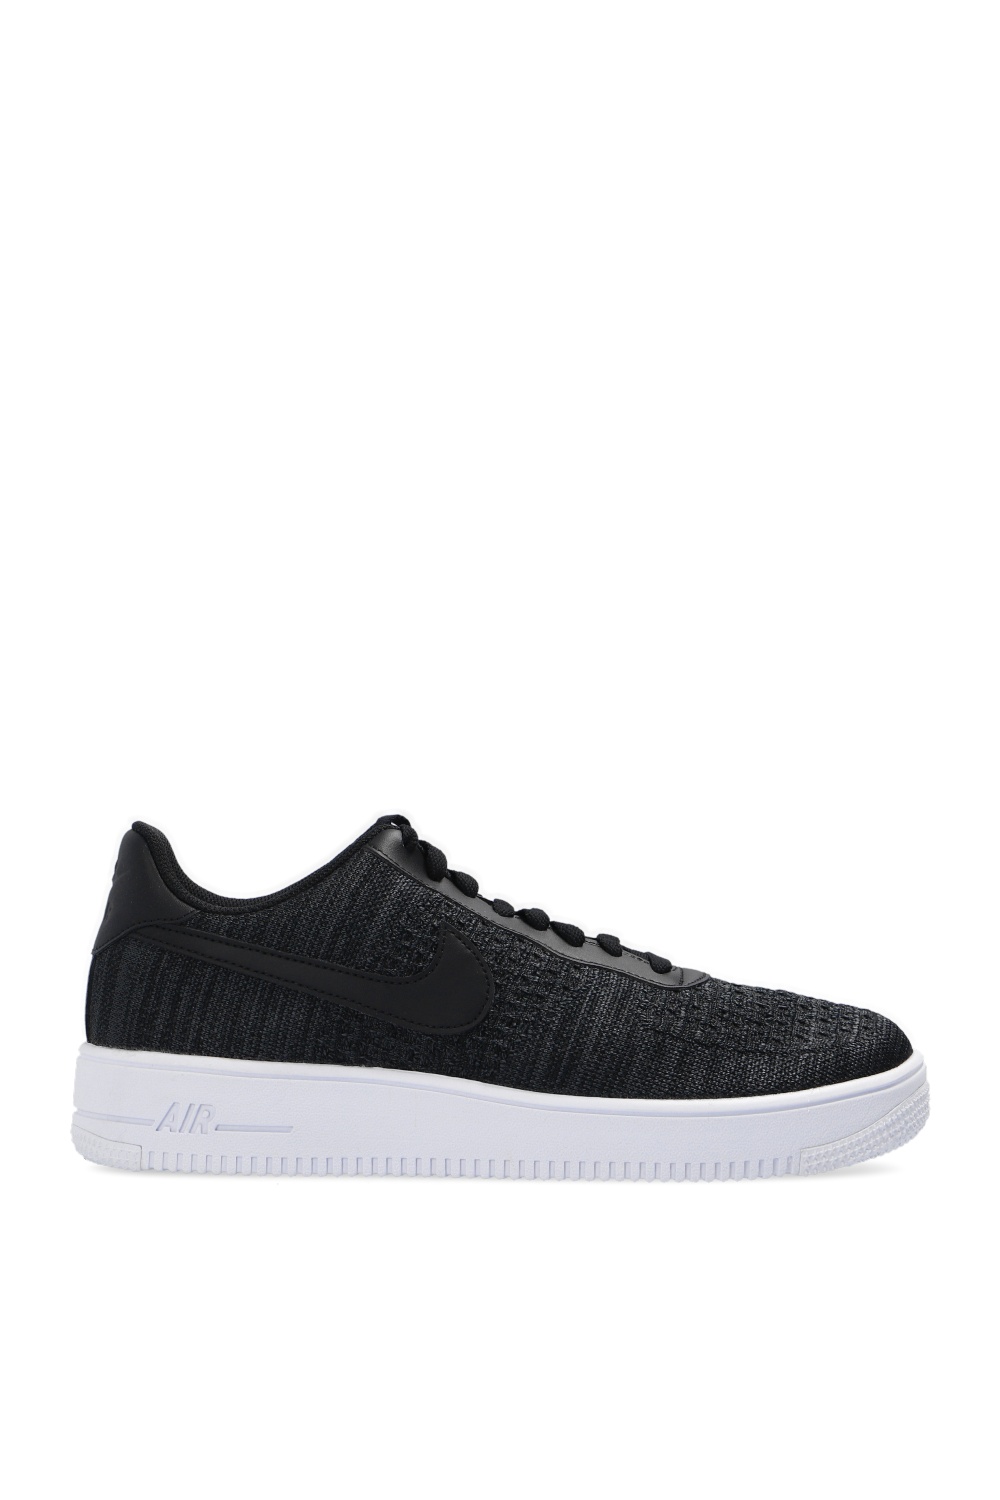 air force 1 flyknit 2.0 black